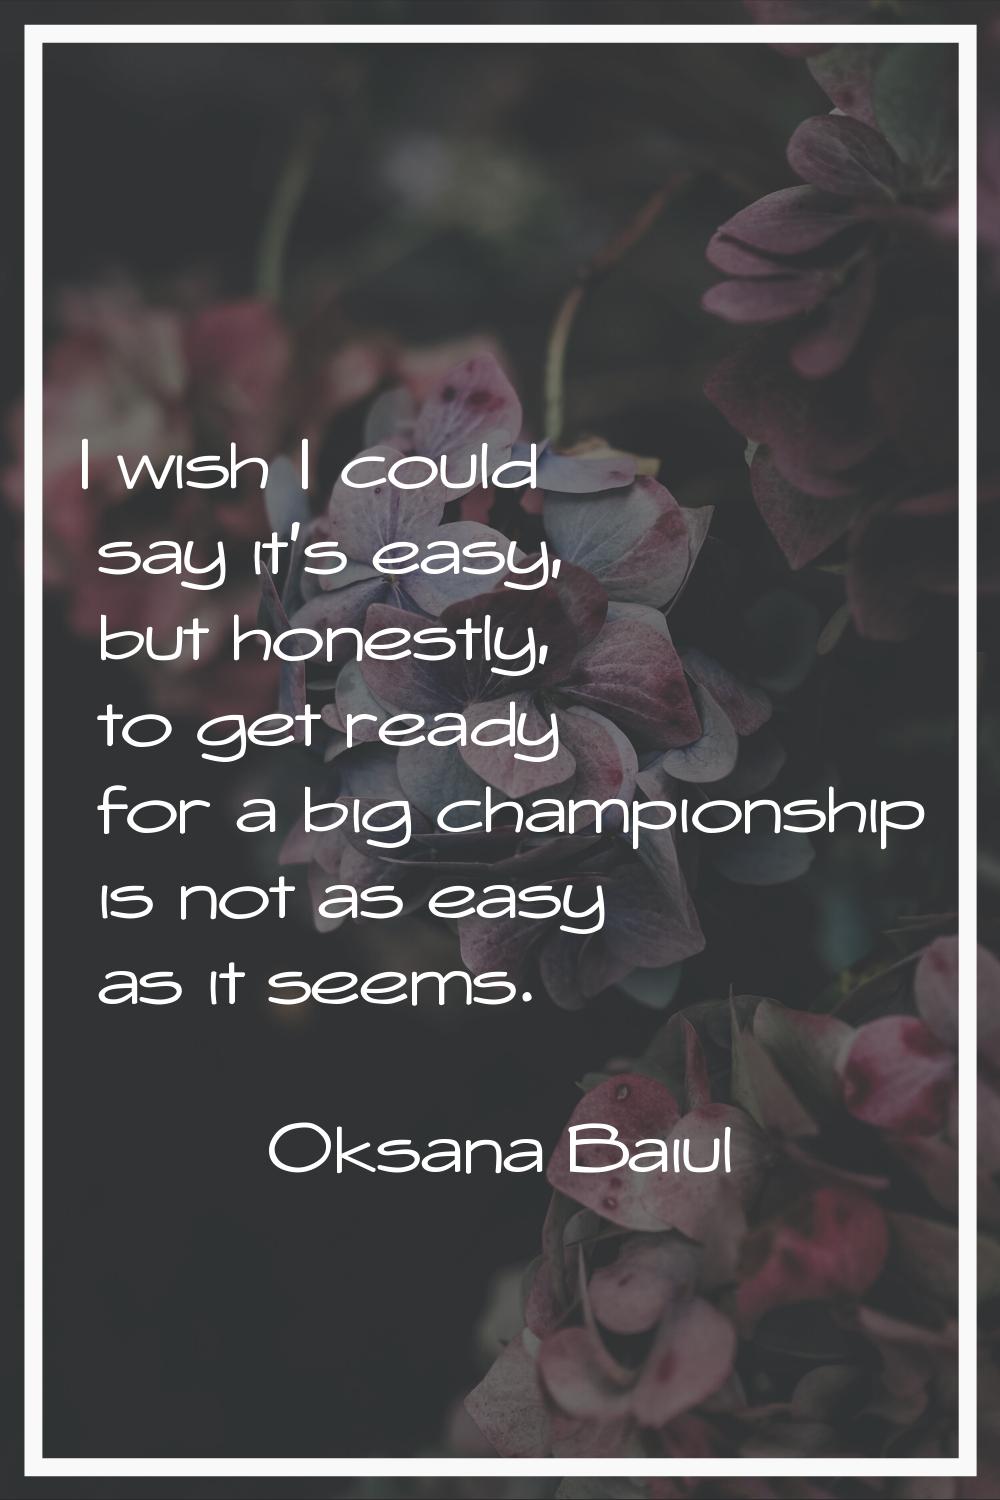 I wish I could say it's easy, but honestly, to get ready for a big championship is not as easy as i